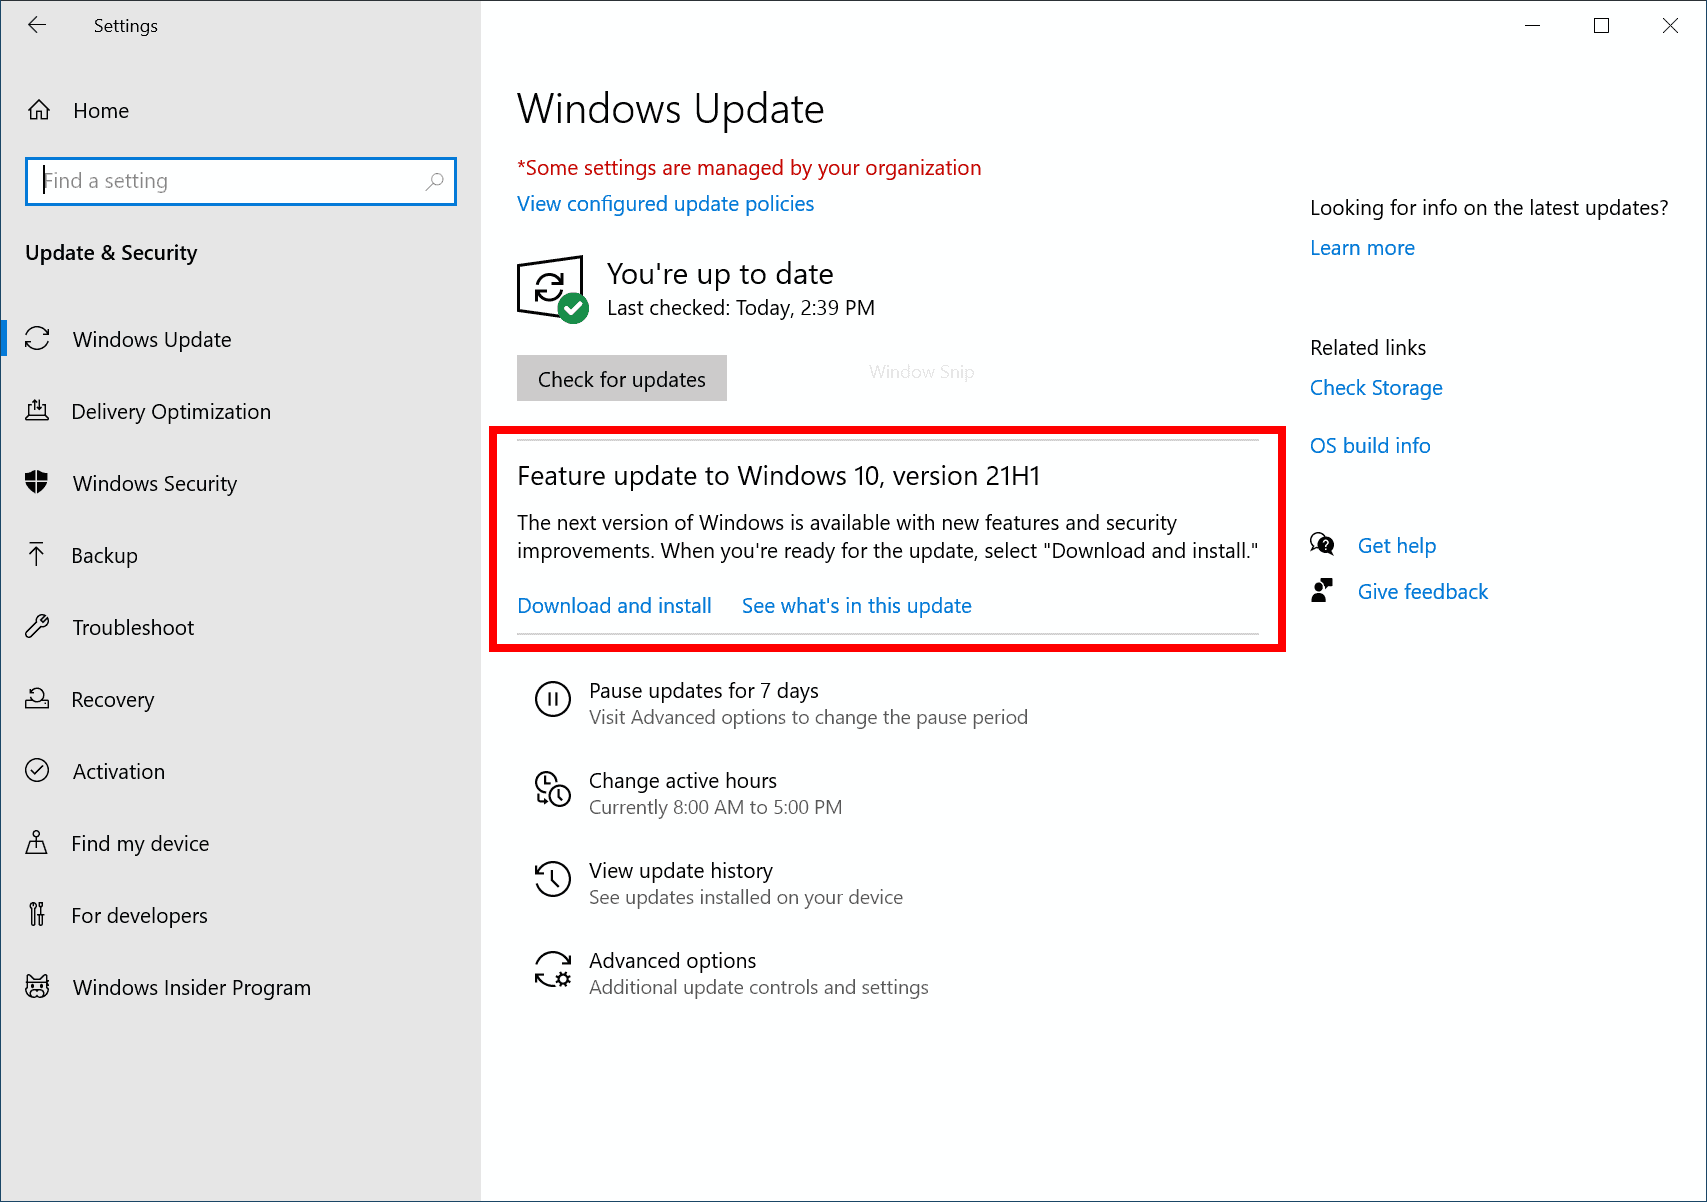 Microsoft release Windows 10 Build 19043.1147 (21H1) to the Release Preview Channel